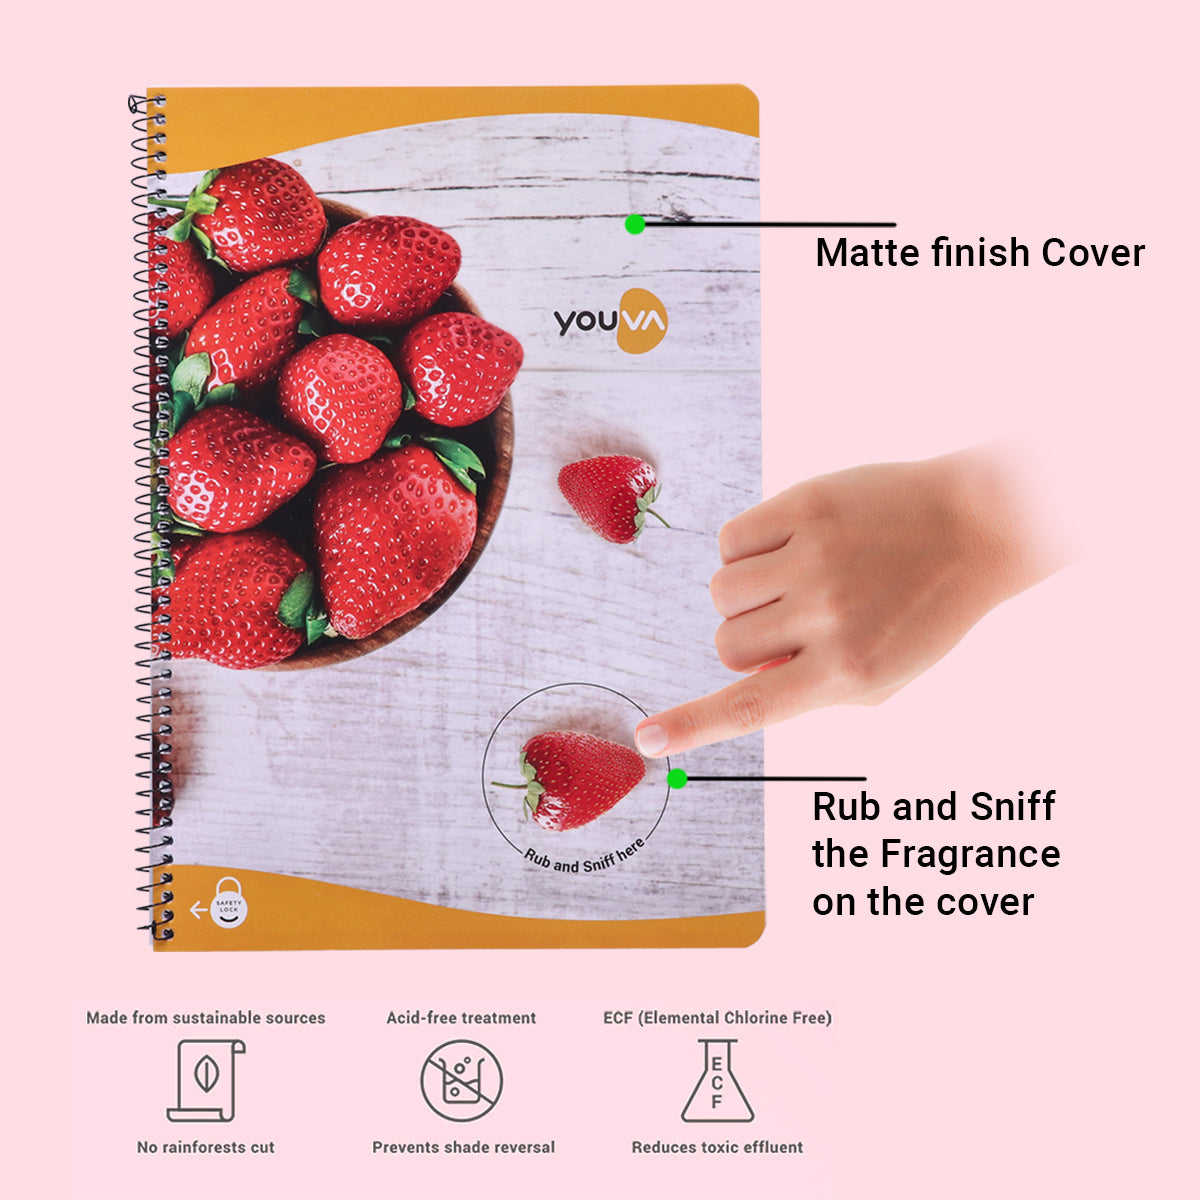 Navneet Youva | Fragrance | Spiral Long book with Fragrance for students and executives | Spiral Bound with safety lock | A4 size - 21 x 29.7 cm | Single Line | 172 Pages | Pack of 1